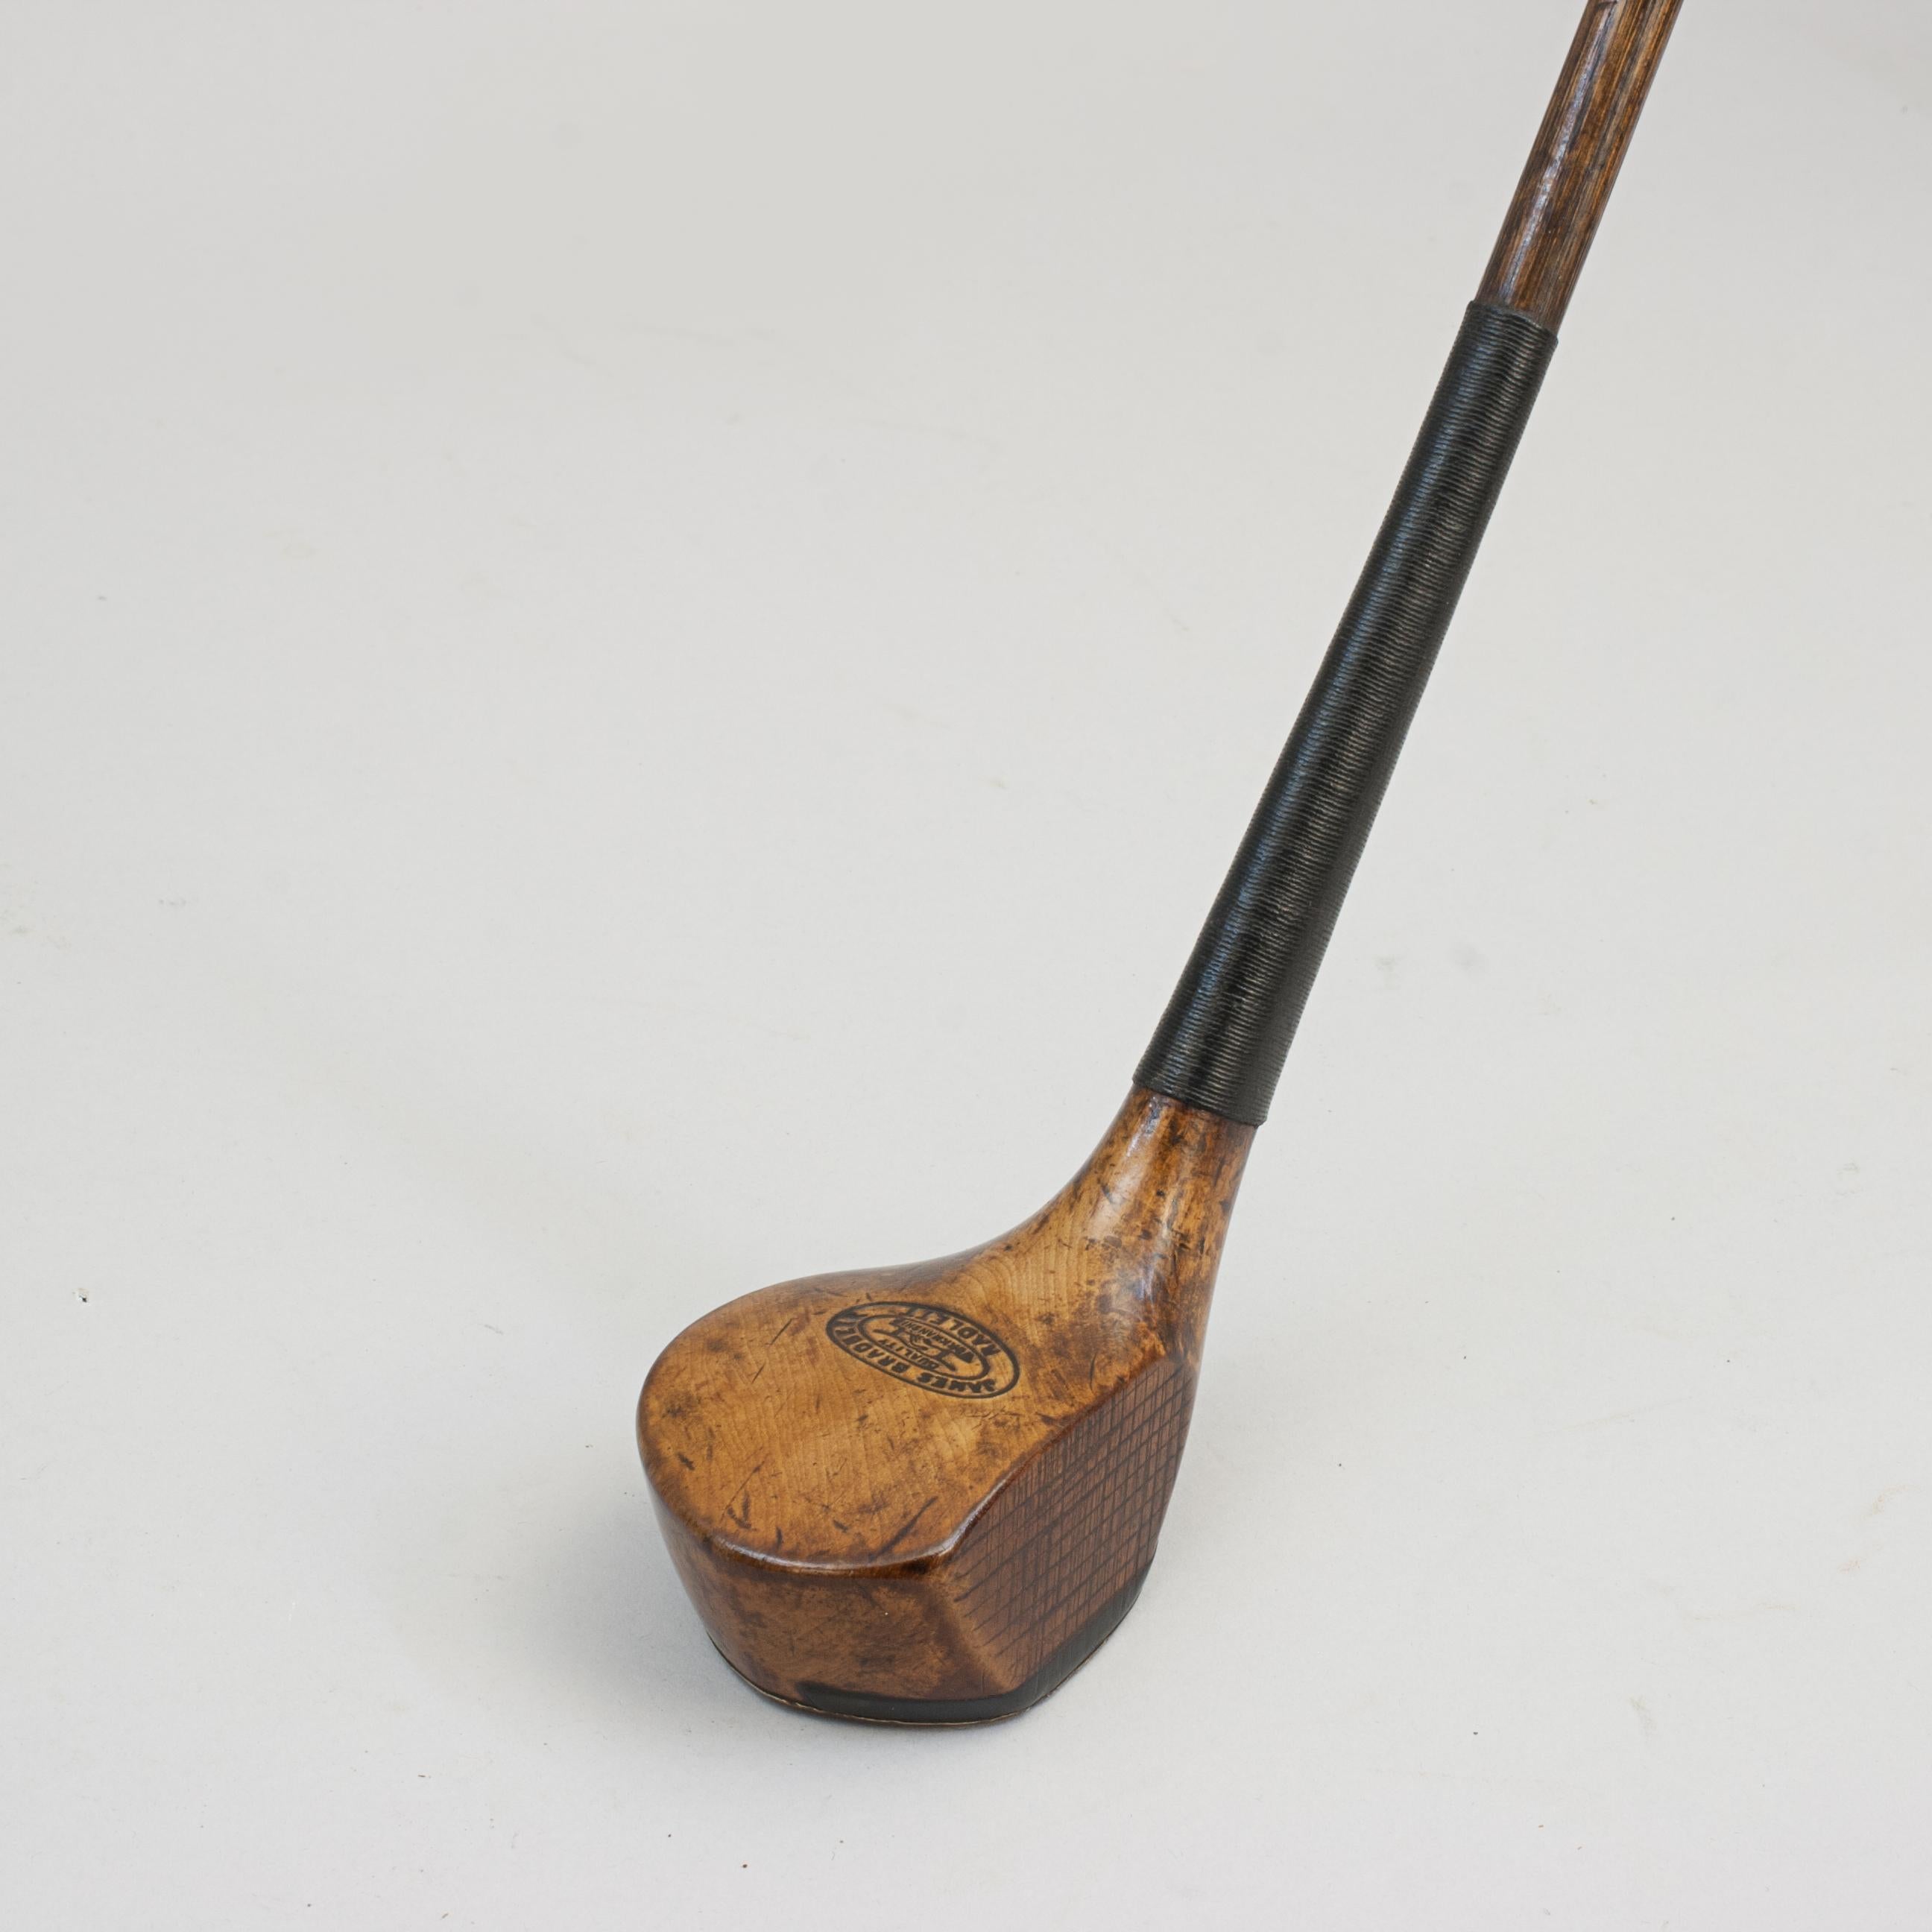 Antique Golf Club, Scared Head Brassie
A nice original beechwood head golf club with hickory shaft and sheepskin grip. The scared head club with traditional horn slip along the leading edge of the sole, full brass sole plate and lead weight to